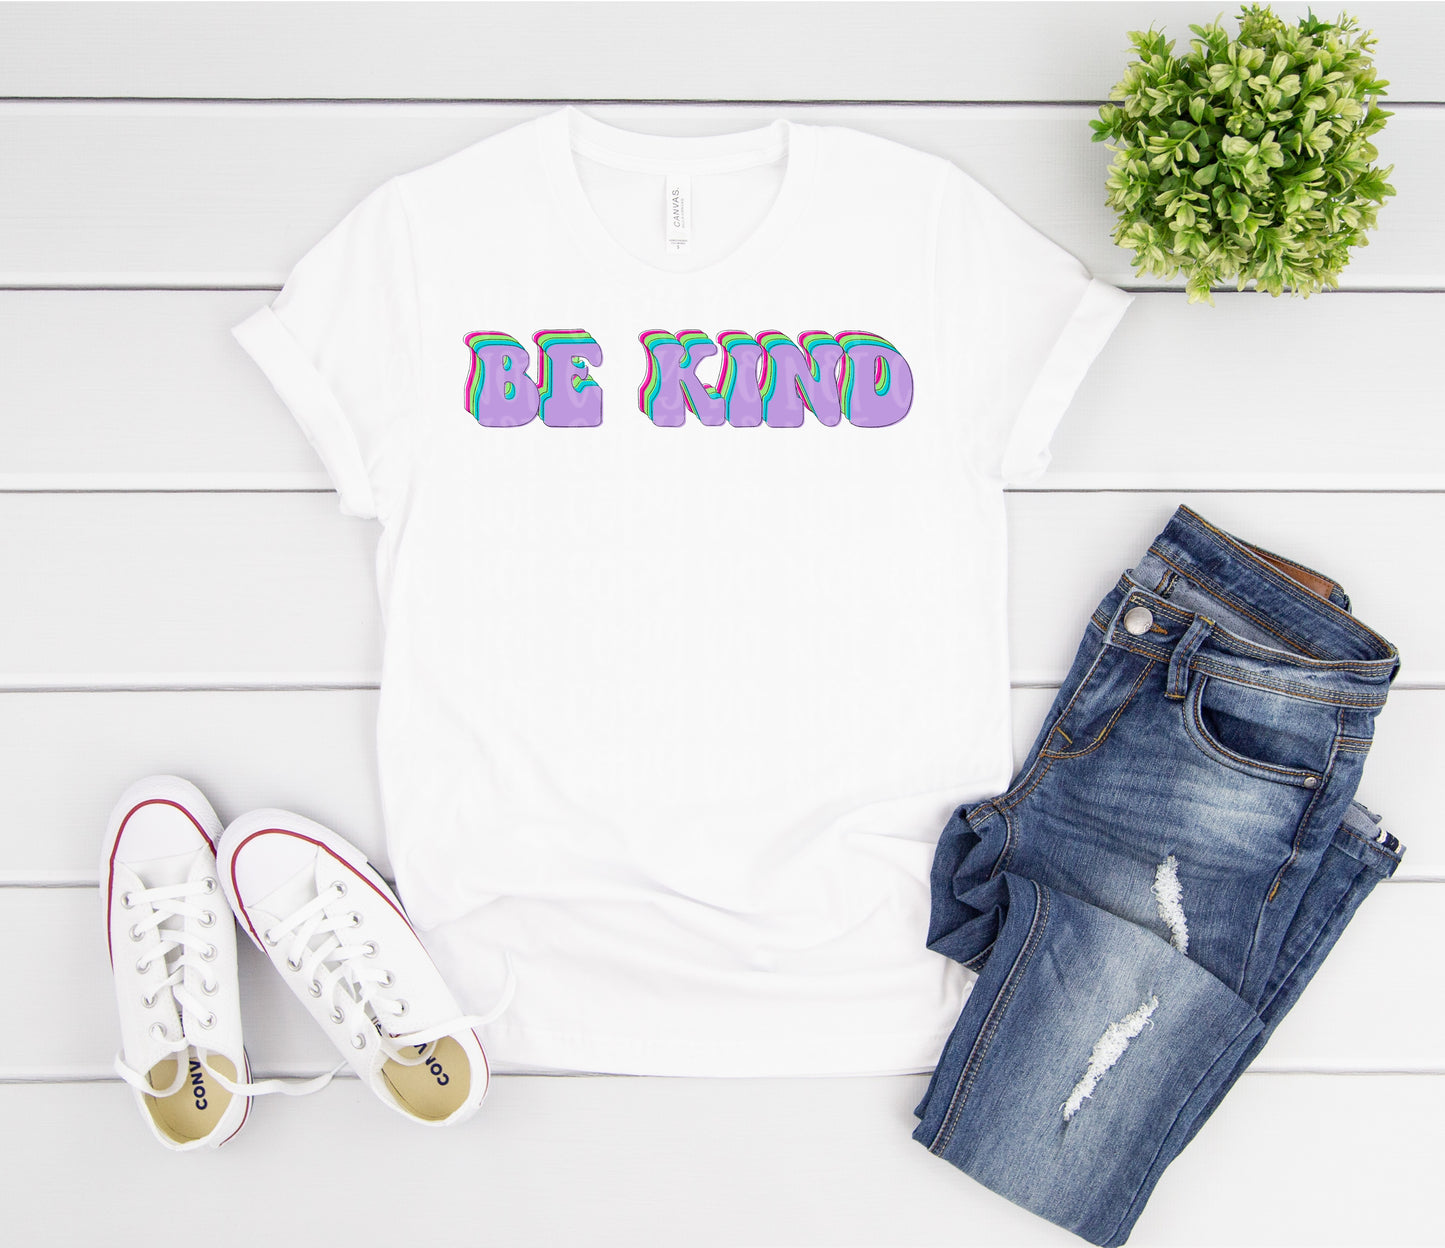 Be Kind retro text